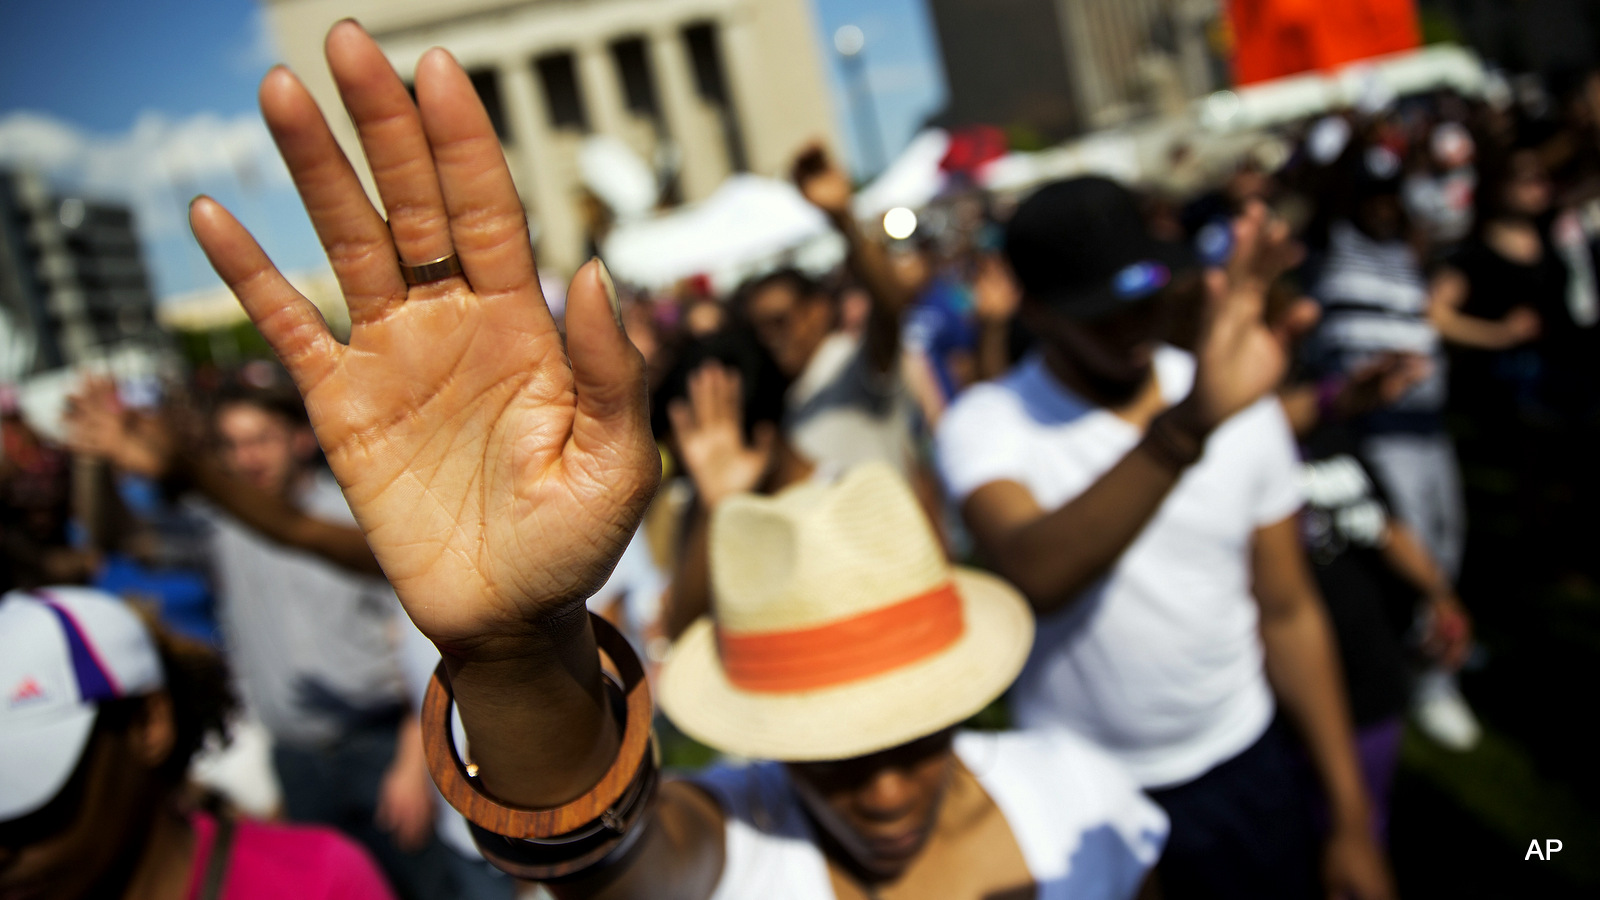 People pray during a rally at City Hall, Sunday, May 3, 2015, in Baltimore. Hundreds of jubilant people prayed and chanted for justice days after the city's top prosecutor charged six officers involved in Freddie Gray's arrest. Gov. Larry Hogan has called for a statewide "Day Of Prayer And Peace" on Sunday after civil unrest rocked Baltimore. 